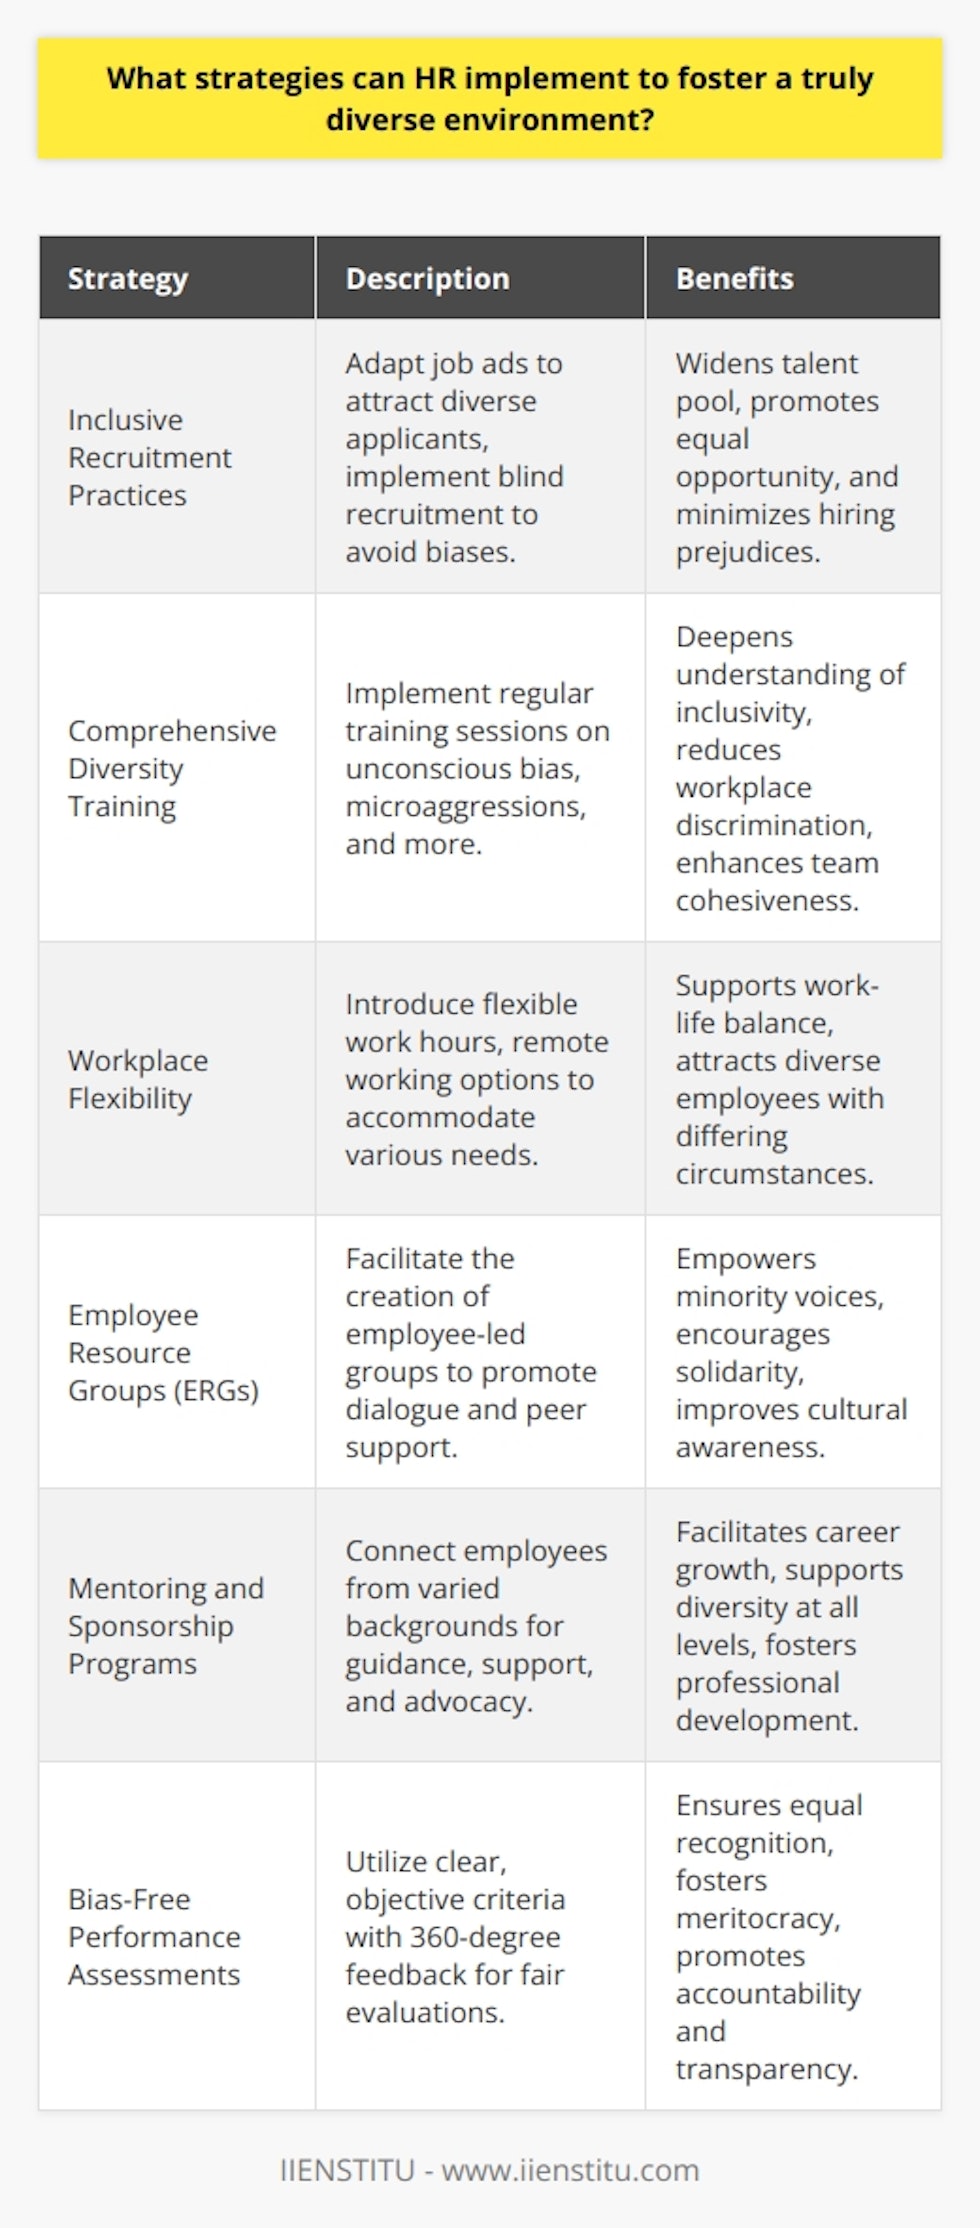 Human Resources (HR) departments play a pivotal role in cultivating a genuinely diverse and inclusive workplace. To achieve this, a suite of strategic initiatives must be adopted that not only abide by legal frameworks but also enrich the organizational culture and enhance the entity's innovative capacity. Here are some vital strategies HR can implement:**Inclusive Recruitment Practices**To ensure a diverse talent pool, HR must refine recruitment practices. This involves crafting job advertisements that resonate with diverse groups, using neutral language that does not subconsciously deter any specific demographic. Methods such as blind recruitment, which obscures candidates' personal details that may influence hiring decisions, help in mitigating biases.**Comprehensive Diversity Training**Ongoing diversity and inclusion training sessions should be integral to any organization's development programs. It's critical that these trainings move beyond superficial diversity initiatives and instill a genuine understanding of the importance of inclusivity, covering topics from unconscious bias to microaggressions in the workplace.**Workplace Flexibility**Flexible working arrangements are key in accommodating a workforce with varied needs. Whether it's through adapting work hours or offering remote work possibilities, such flexibility enables individuals with different life circumstances to thrive professionally.**Establishment of Employee Resource Groups**Creating safe spaces for minority groups within the company encourages dialogue and peer support. Employee Resource Groups (ERGs) are voluntary, employee-led groups that foster a diverse, inclusive workplace aligned with the organizations they serve.**Mentoring and Sponsorship Programs**HR should implement mentoring and sponsorship programs that intentionally connect employees from different backgrounds. Mentorship provides guidance and support for career growth, while sponsorship extends beyond advice to active advocacy and door-opening.**Bias-Free Performance Assessments**Performance evaluations must be critically examined to eradicate potential bias. This involves establishing transparent, objective criteria for assessment and incorporating a 360-degree feedback mechanism to ensure a fair evaluation from multiple viewpoints.By integrating these strategies, HR departments can lay the groundwork for not only a legally compliant but also a morally commendable approach to workplace diversity. Diversity is not merely a box-ticking exercise but a catalyst for innovation, cultural enrichment, and organizational success. Through continuous efforts and dedicated strategies, HR can create work environments that embody the full spectrum of human diversity, unleashing the potential of every individual and driving the collective forward.